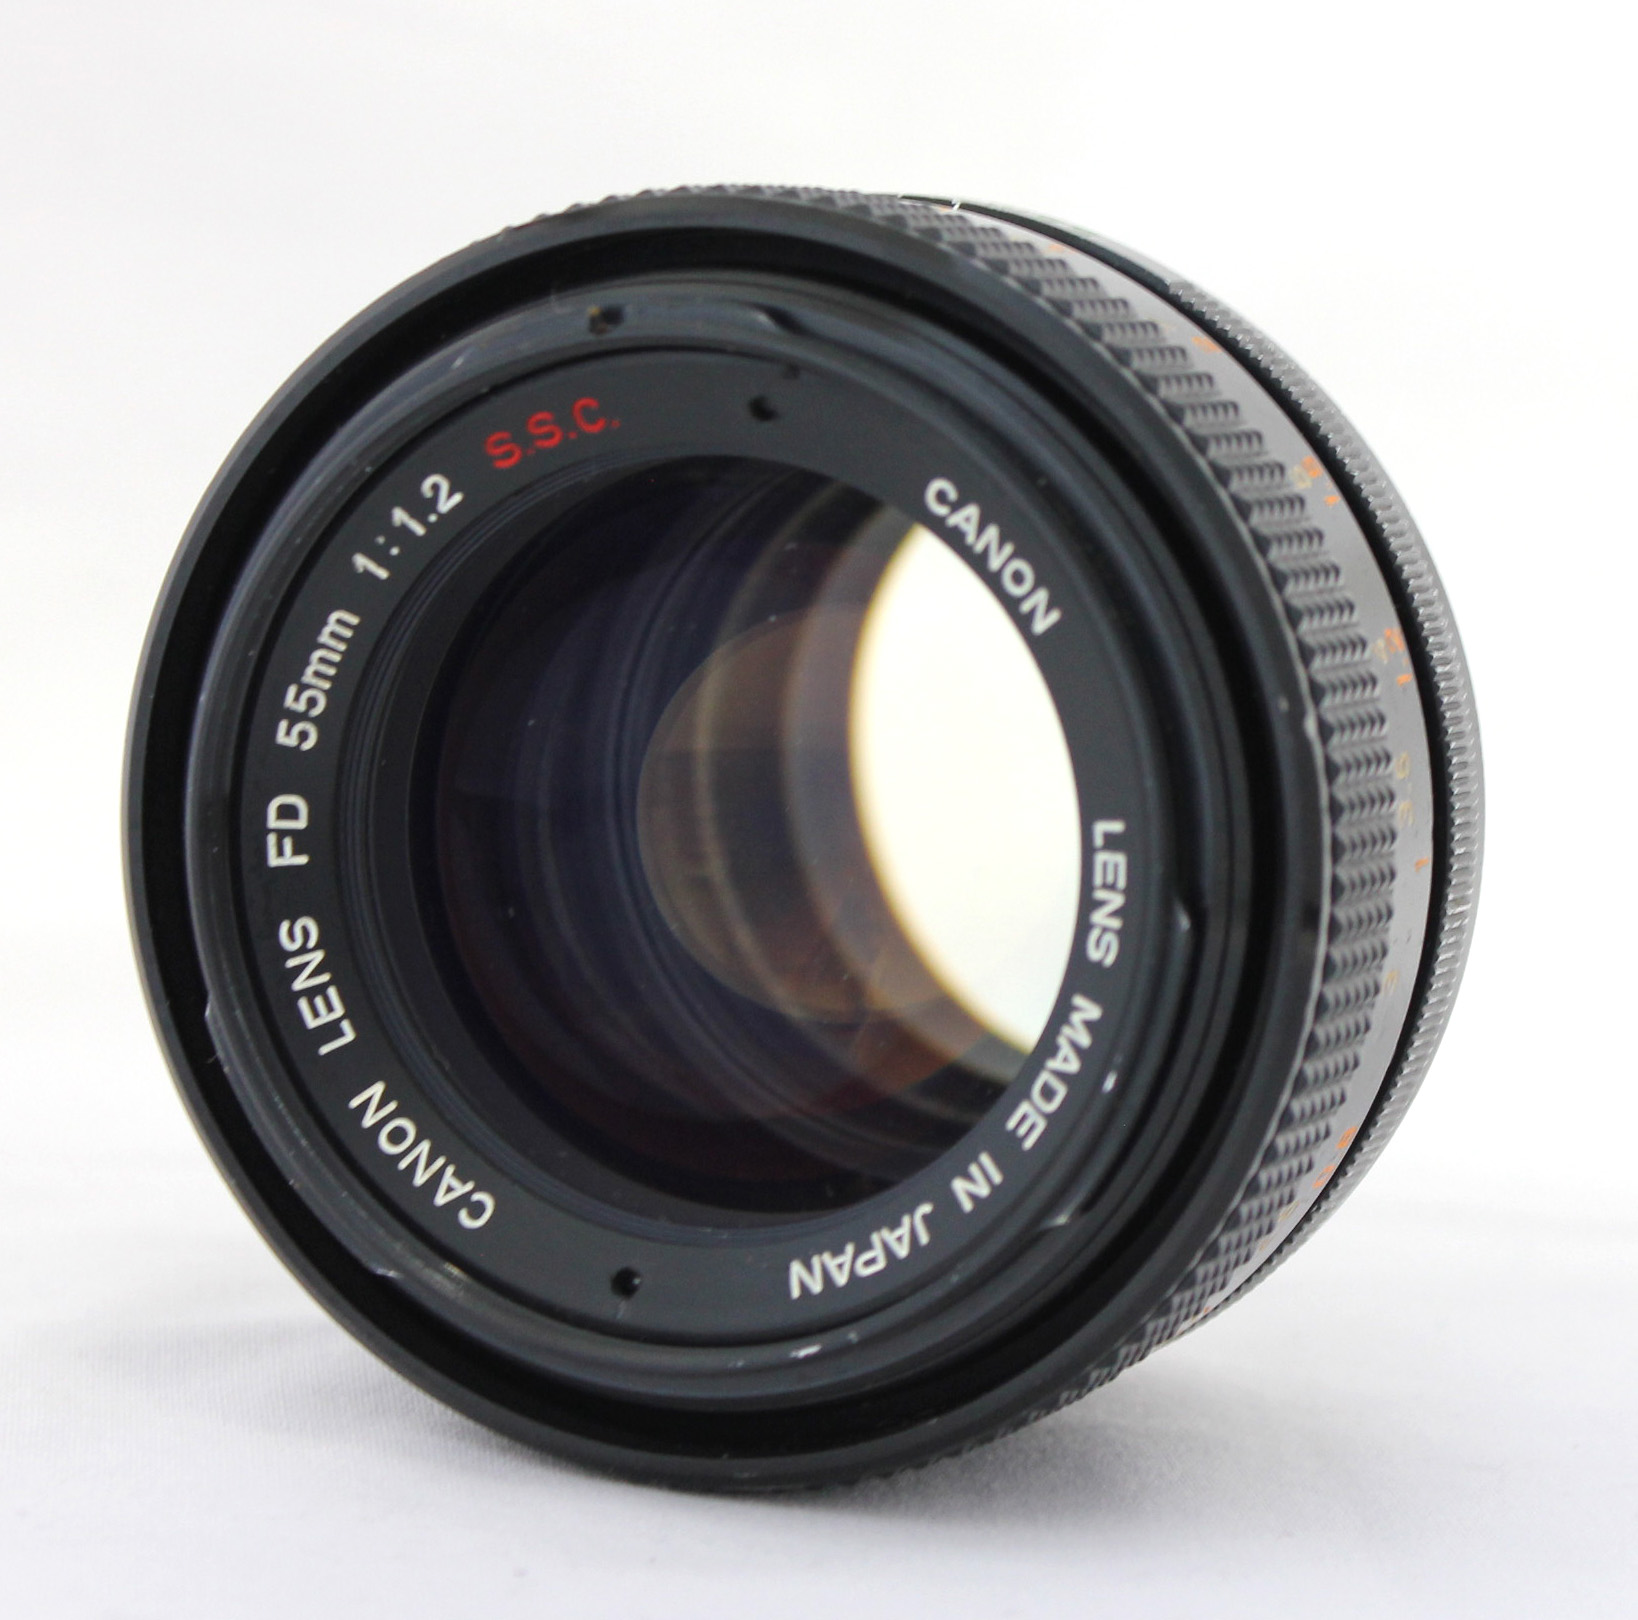  Canon FD 55mm F/1.2 S.S.C. ssc MF Standard Prime Lens from Japan Photo 0